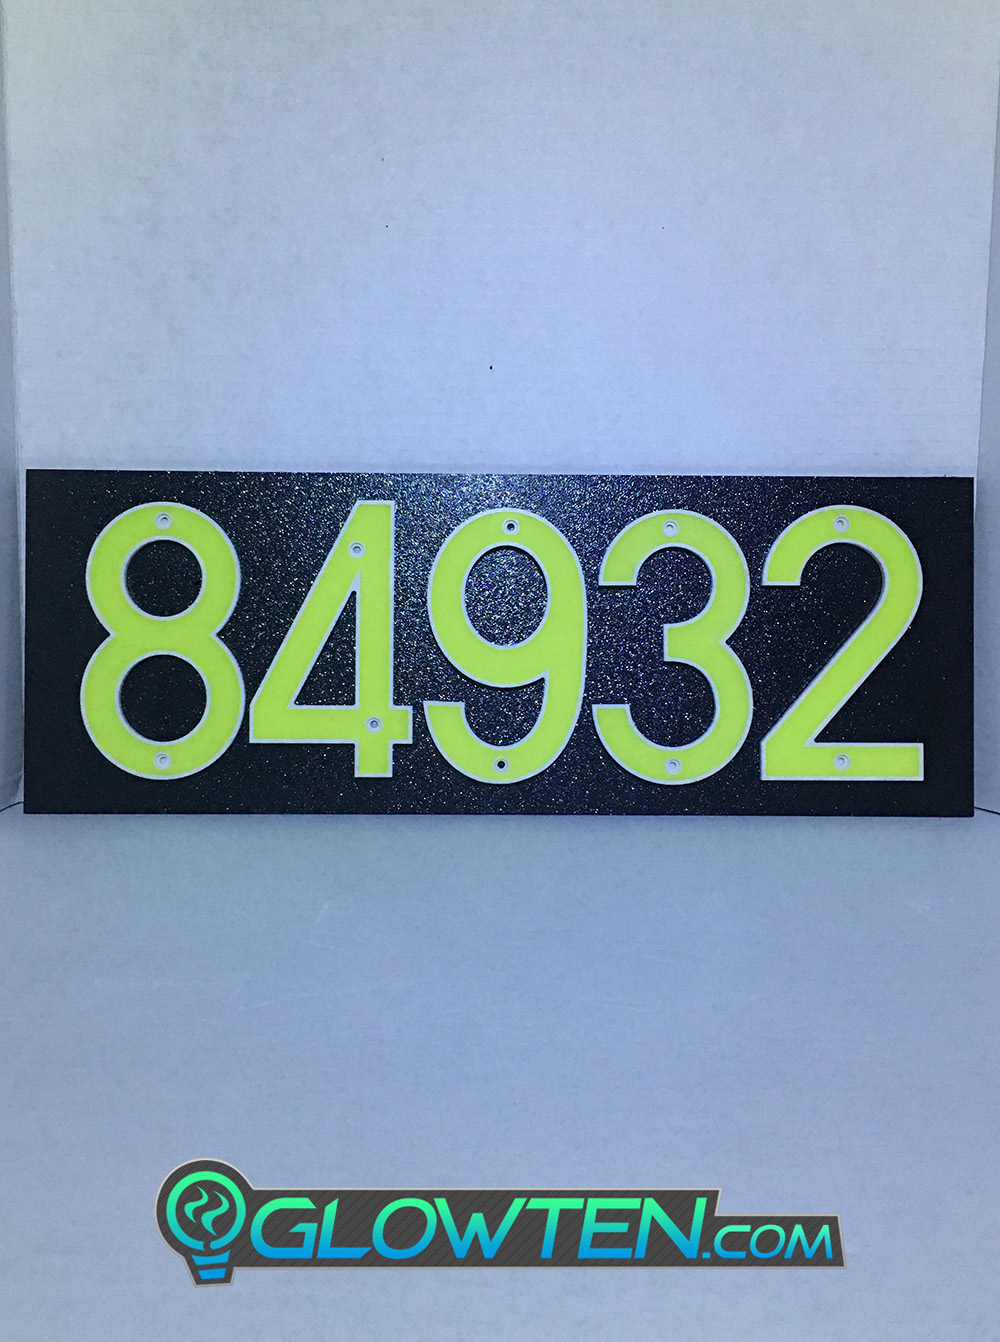 GLOWTEN.com - Emitting Long Lasting Glow Photo Luminescent Vinyl ABS Plastic FIVE 5 NUMBERS with BLACK PLAQUE BACKING Glow In Dark House Address Number Horizontal Eco Friendly Photoluminescent Sign ABS Material Price For Whole Set picture photo cap preview pic image search 1